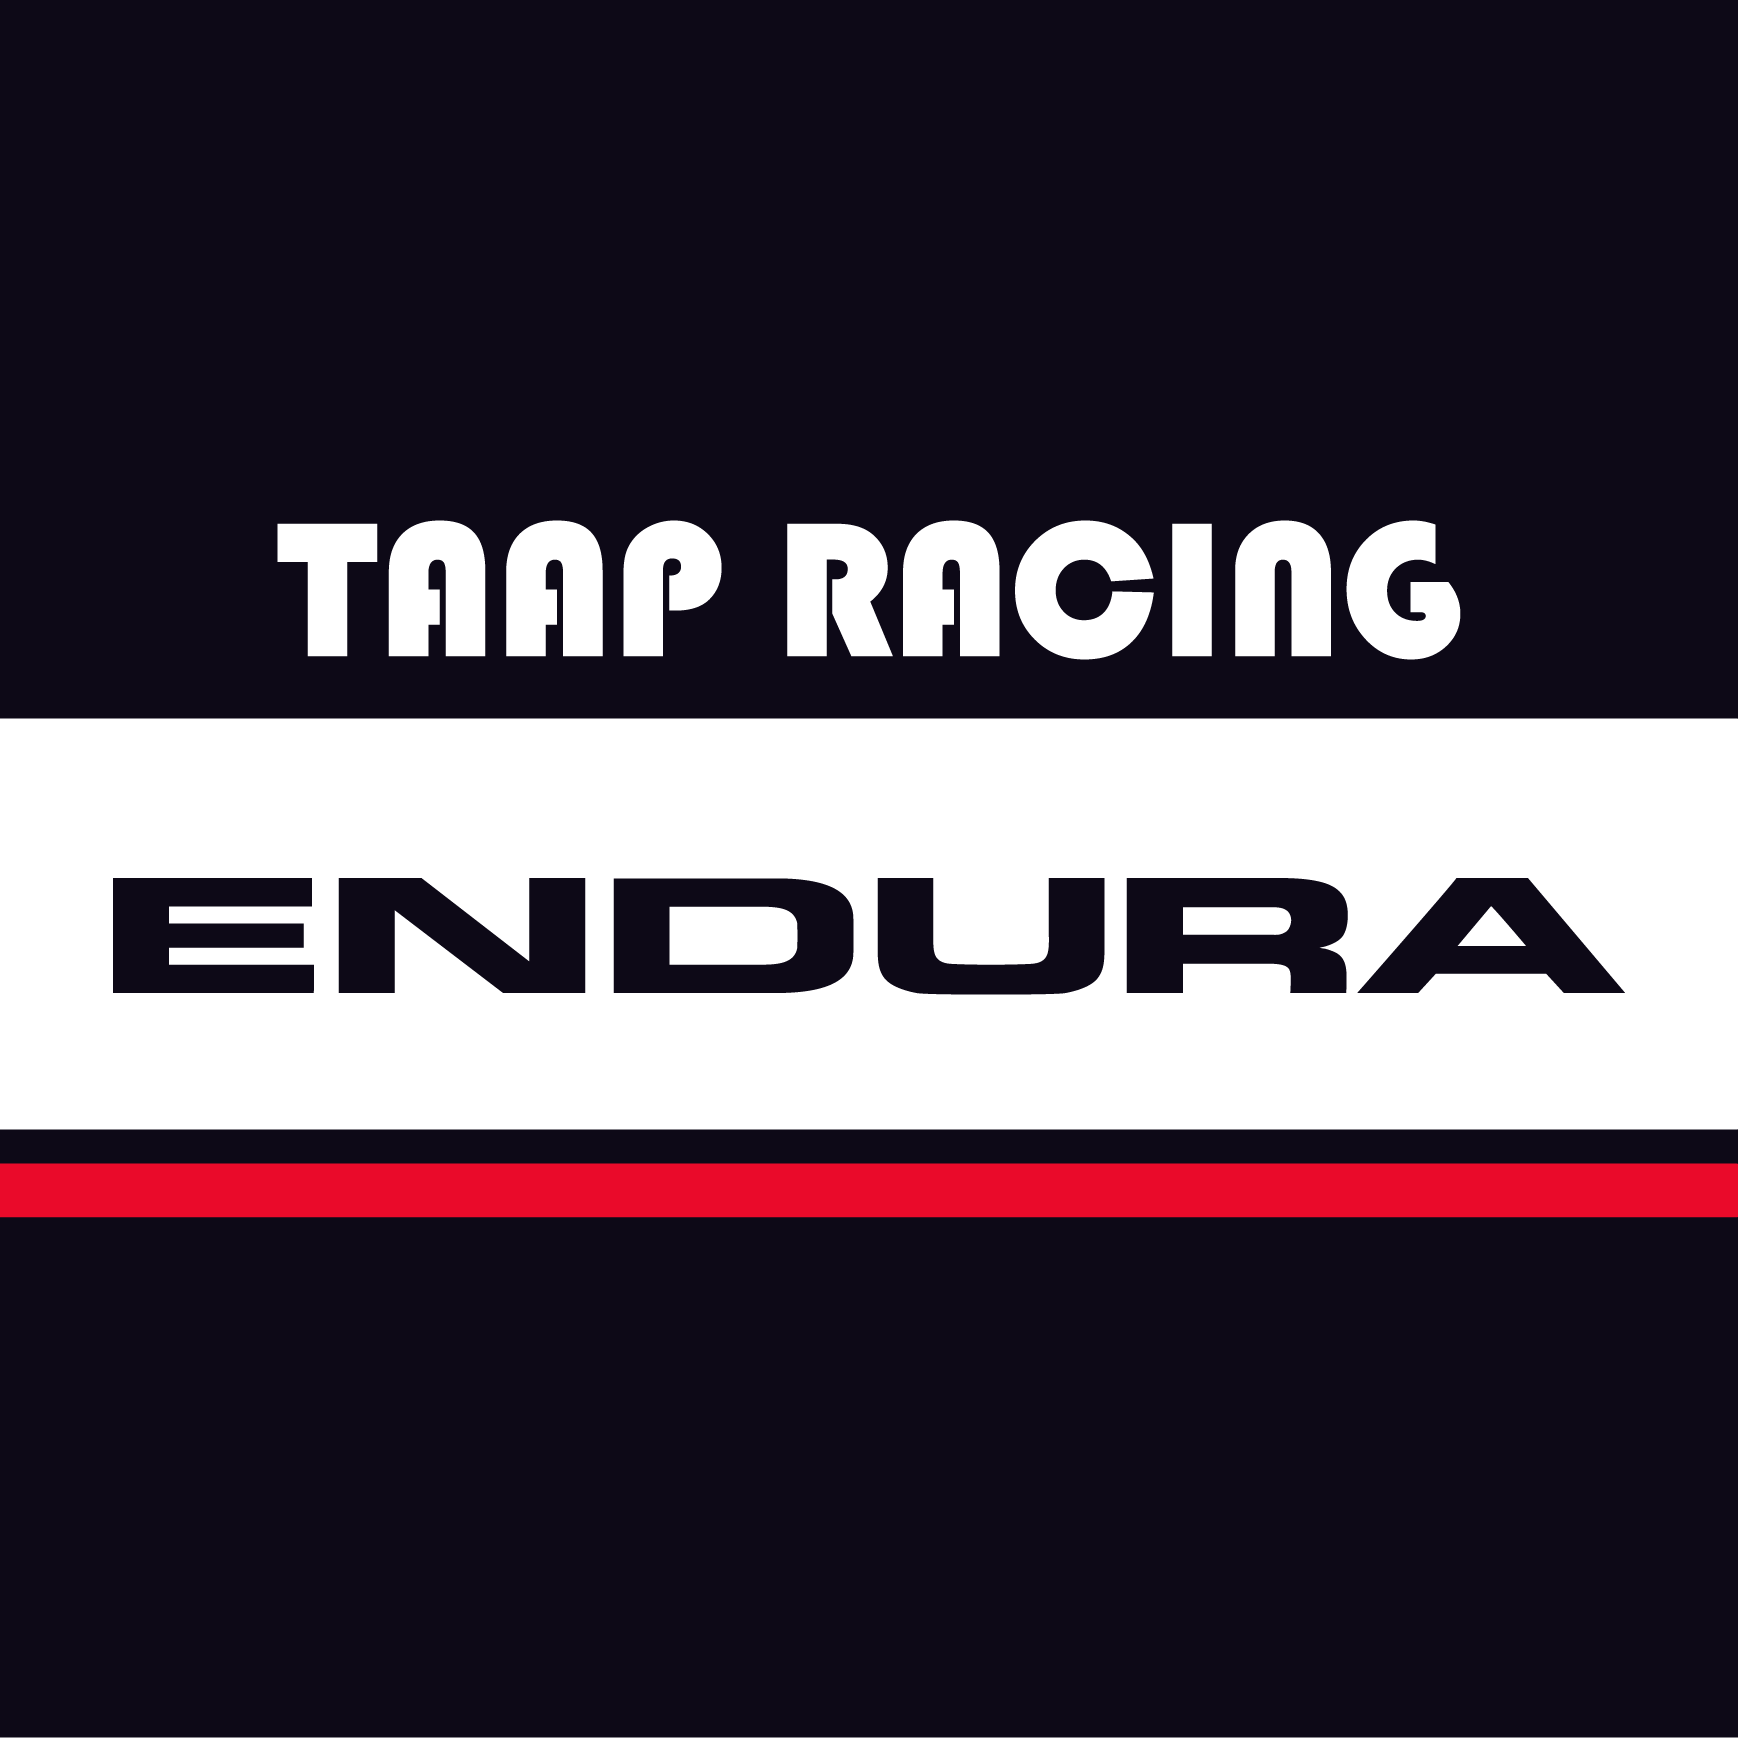 Club Image for TAAP RACING